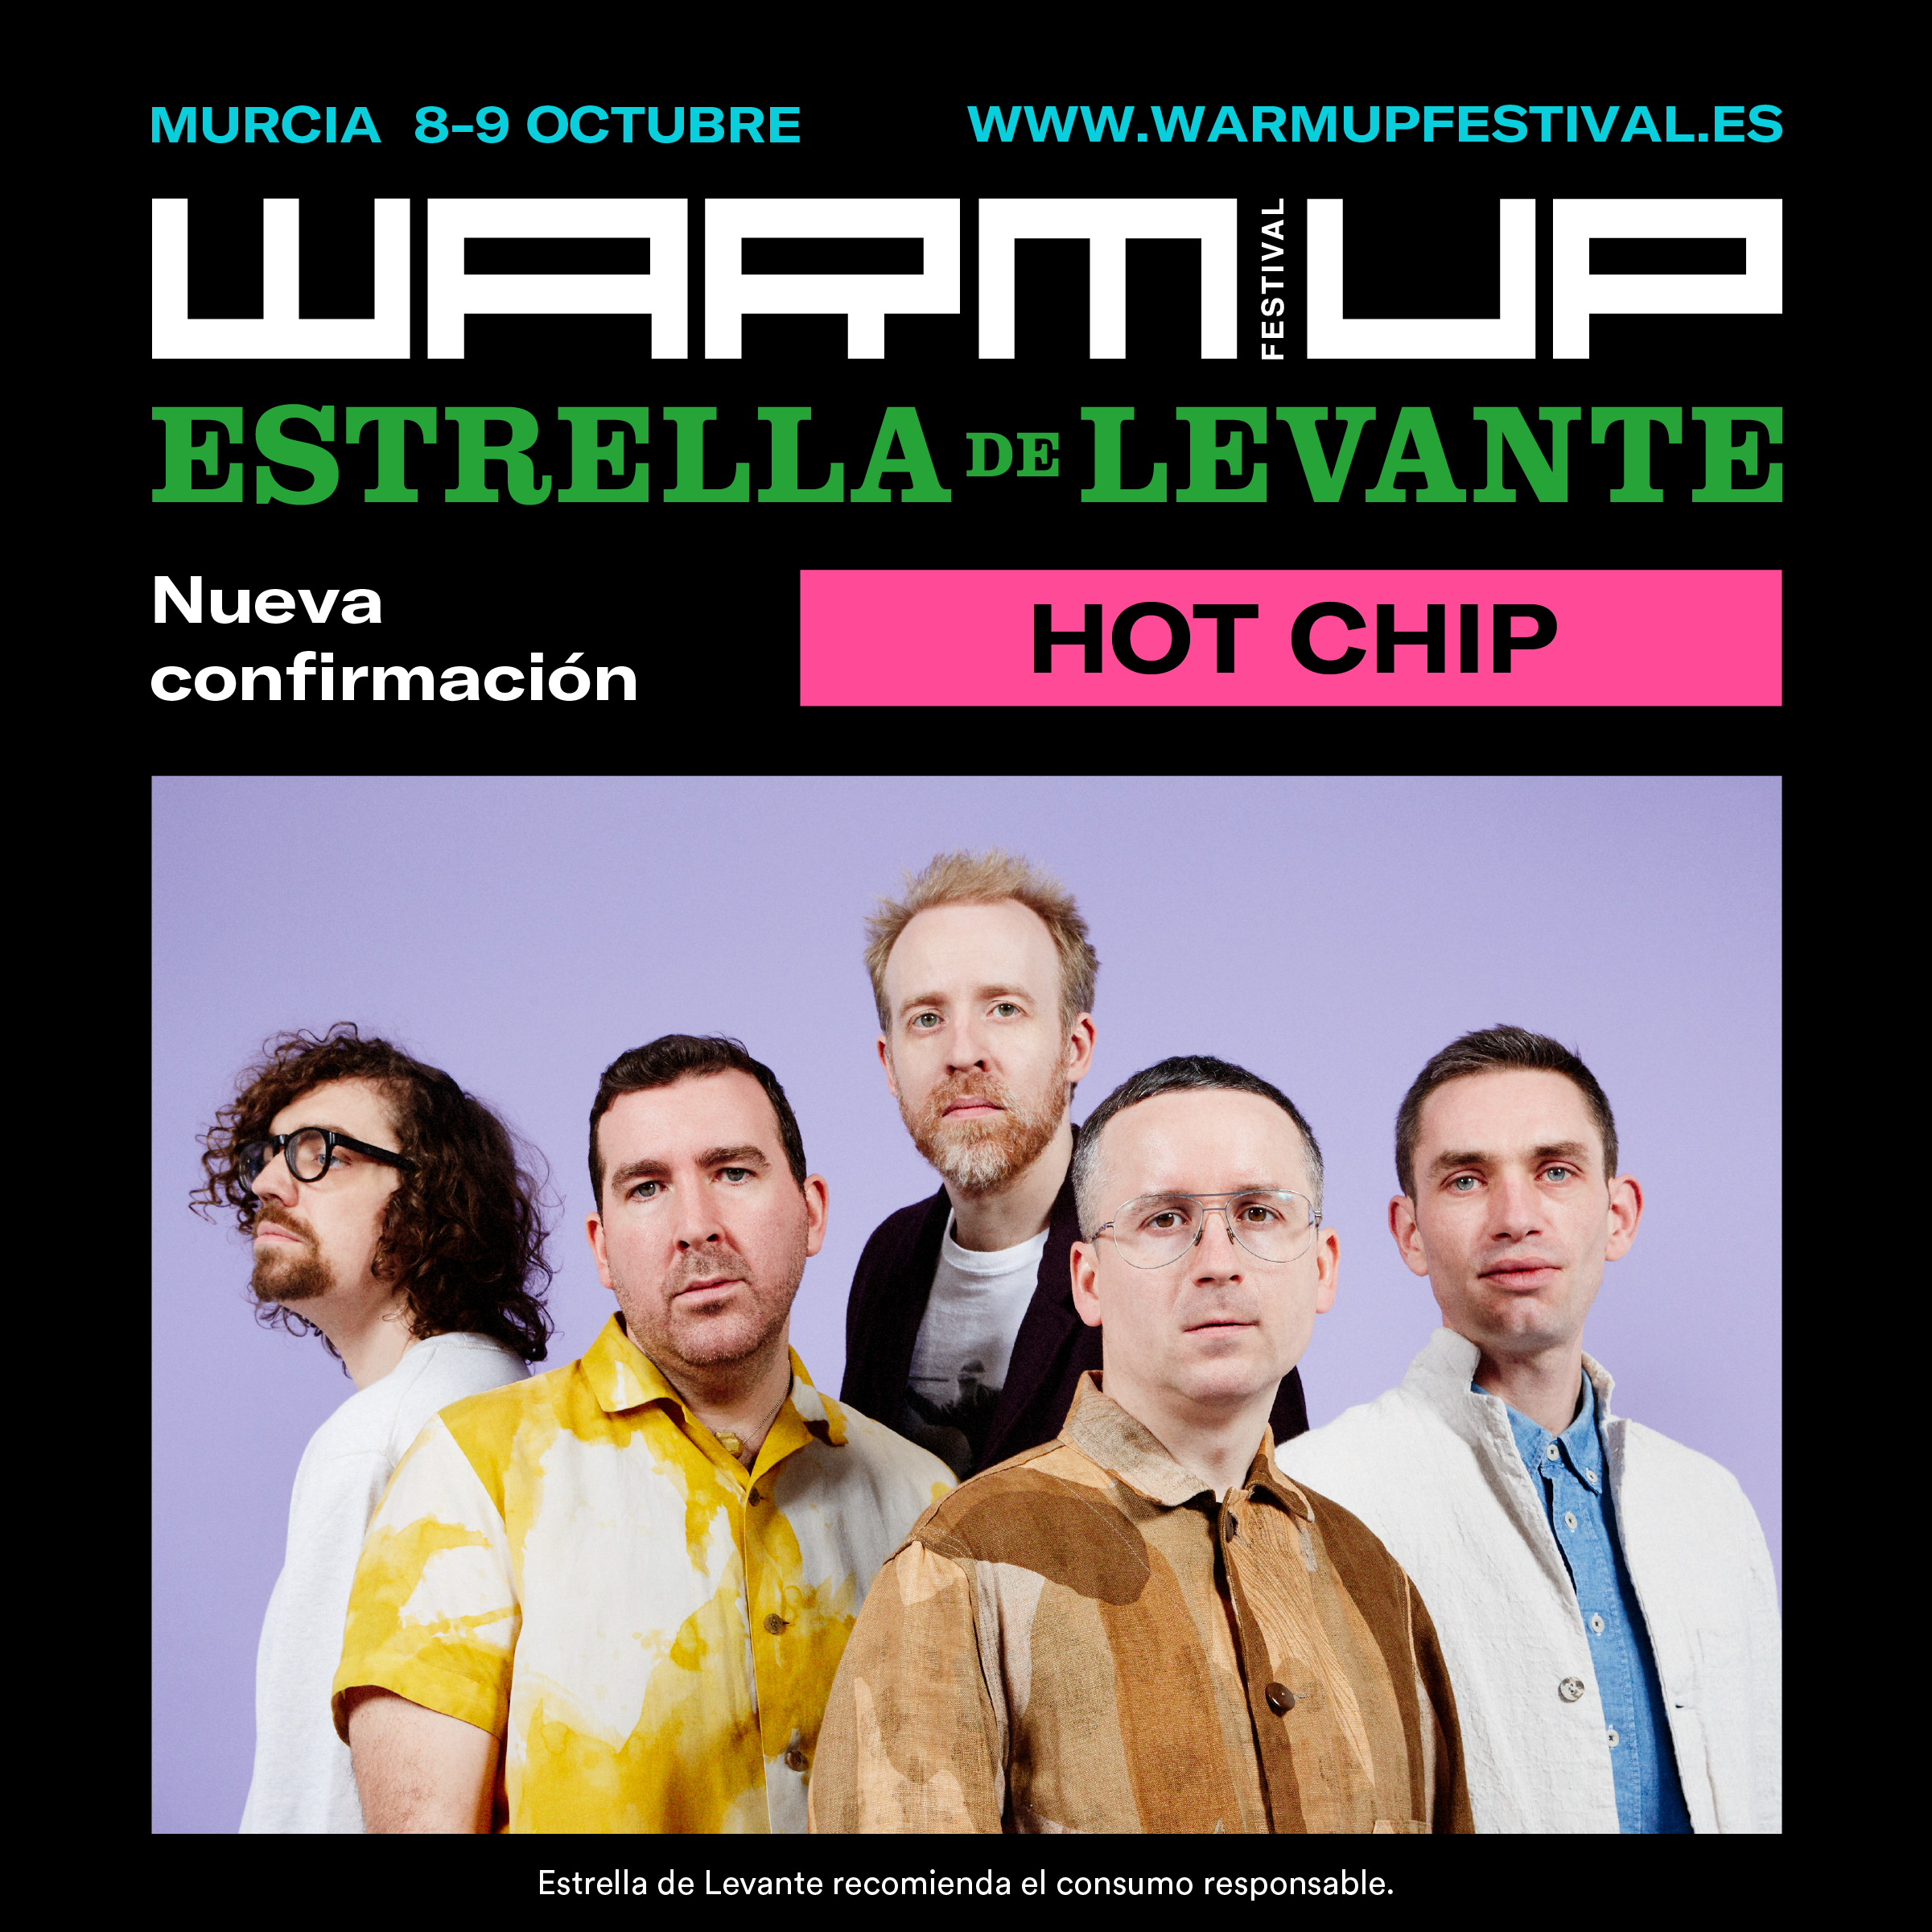 Warm UP 2021 hot chip